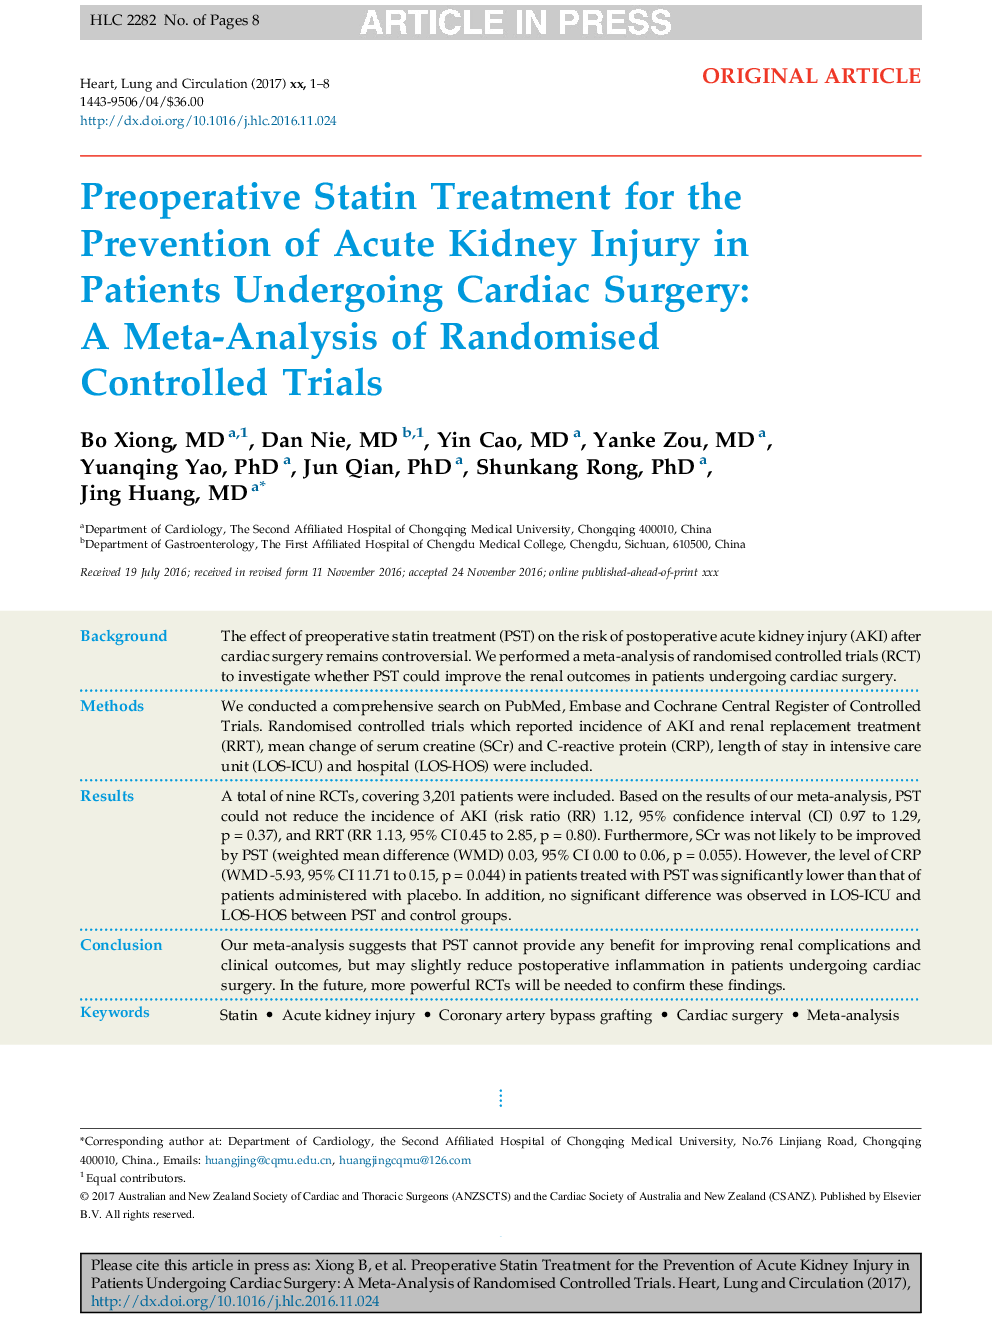 Preoperative Statin Treatment for the Prevention of Acute Kidney Injury in Patients Undergoing Cardiac Surgery: A Meta-Analysis of Randomised Controlled Trials